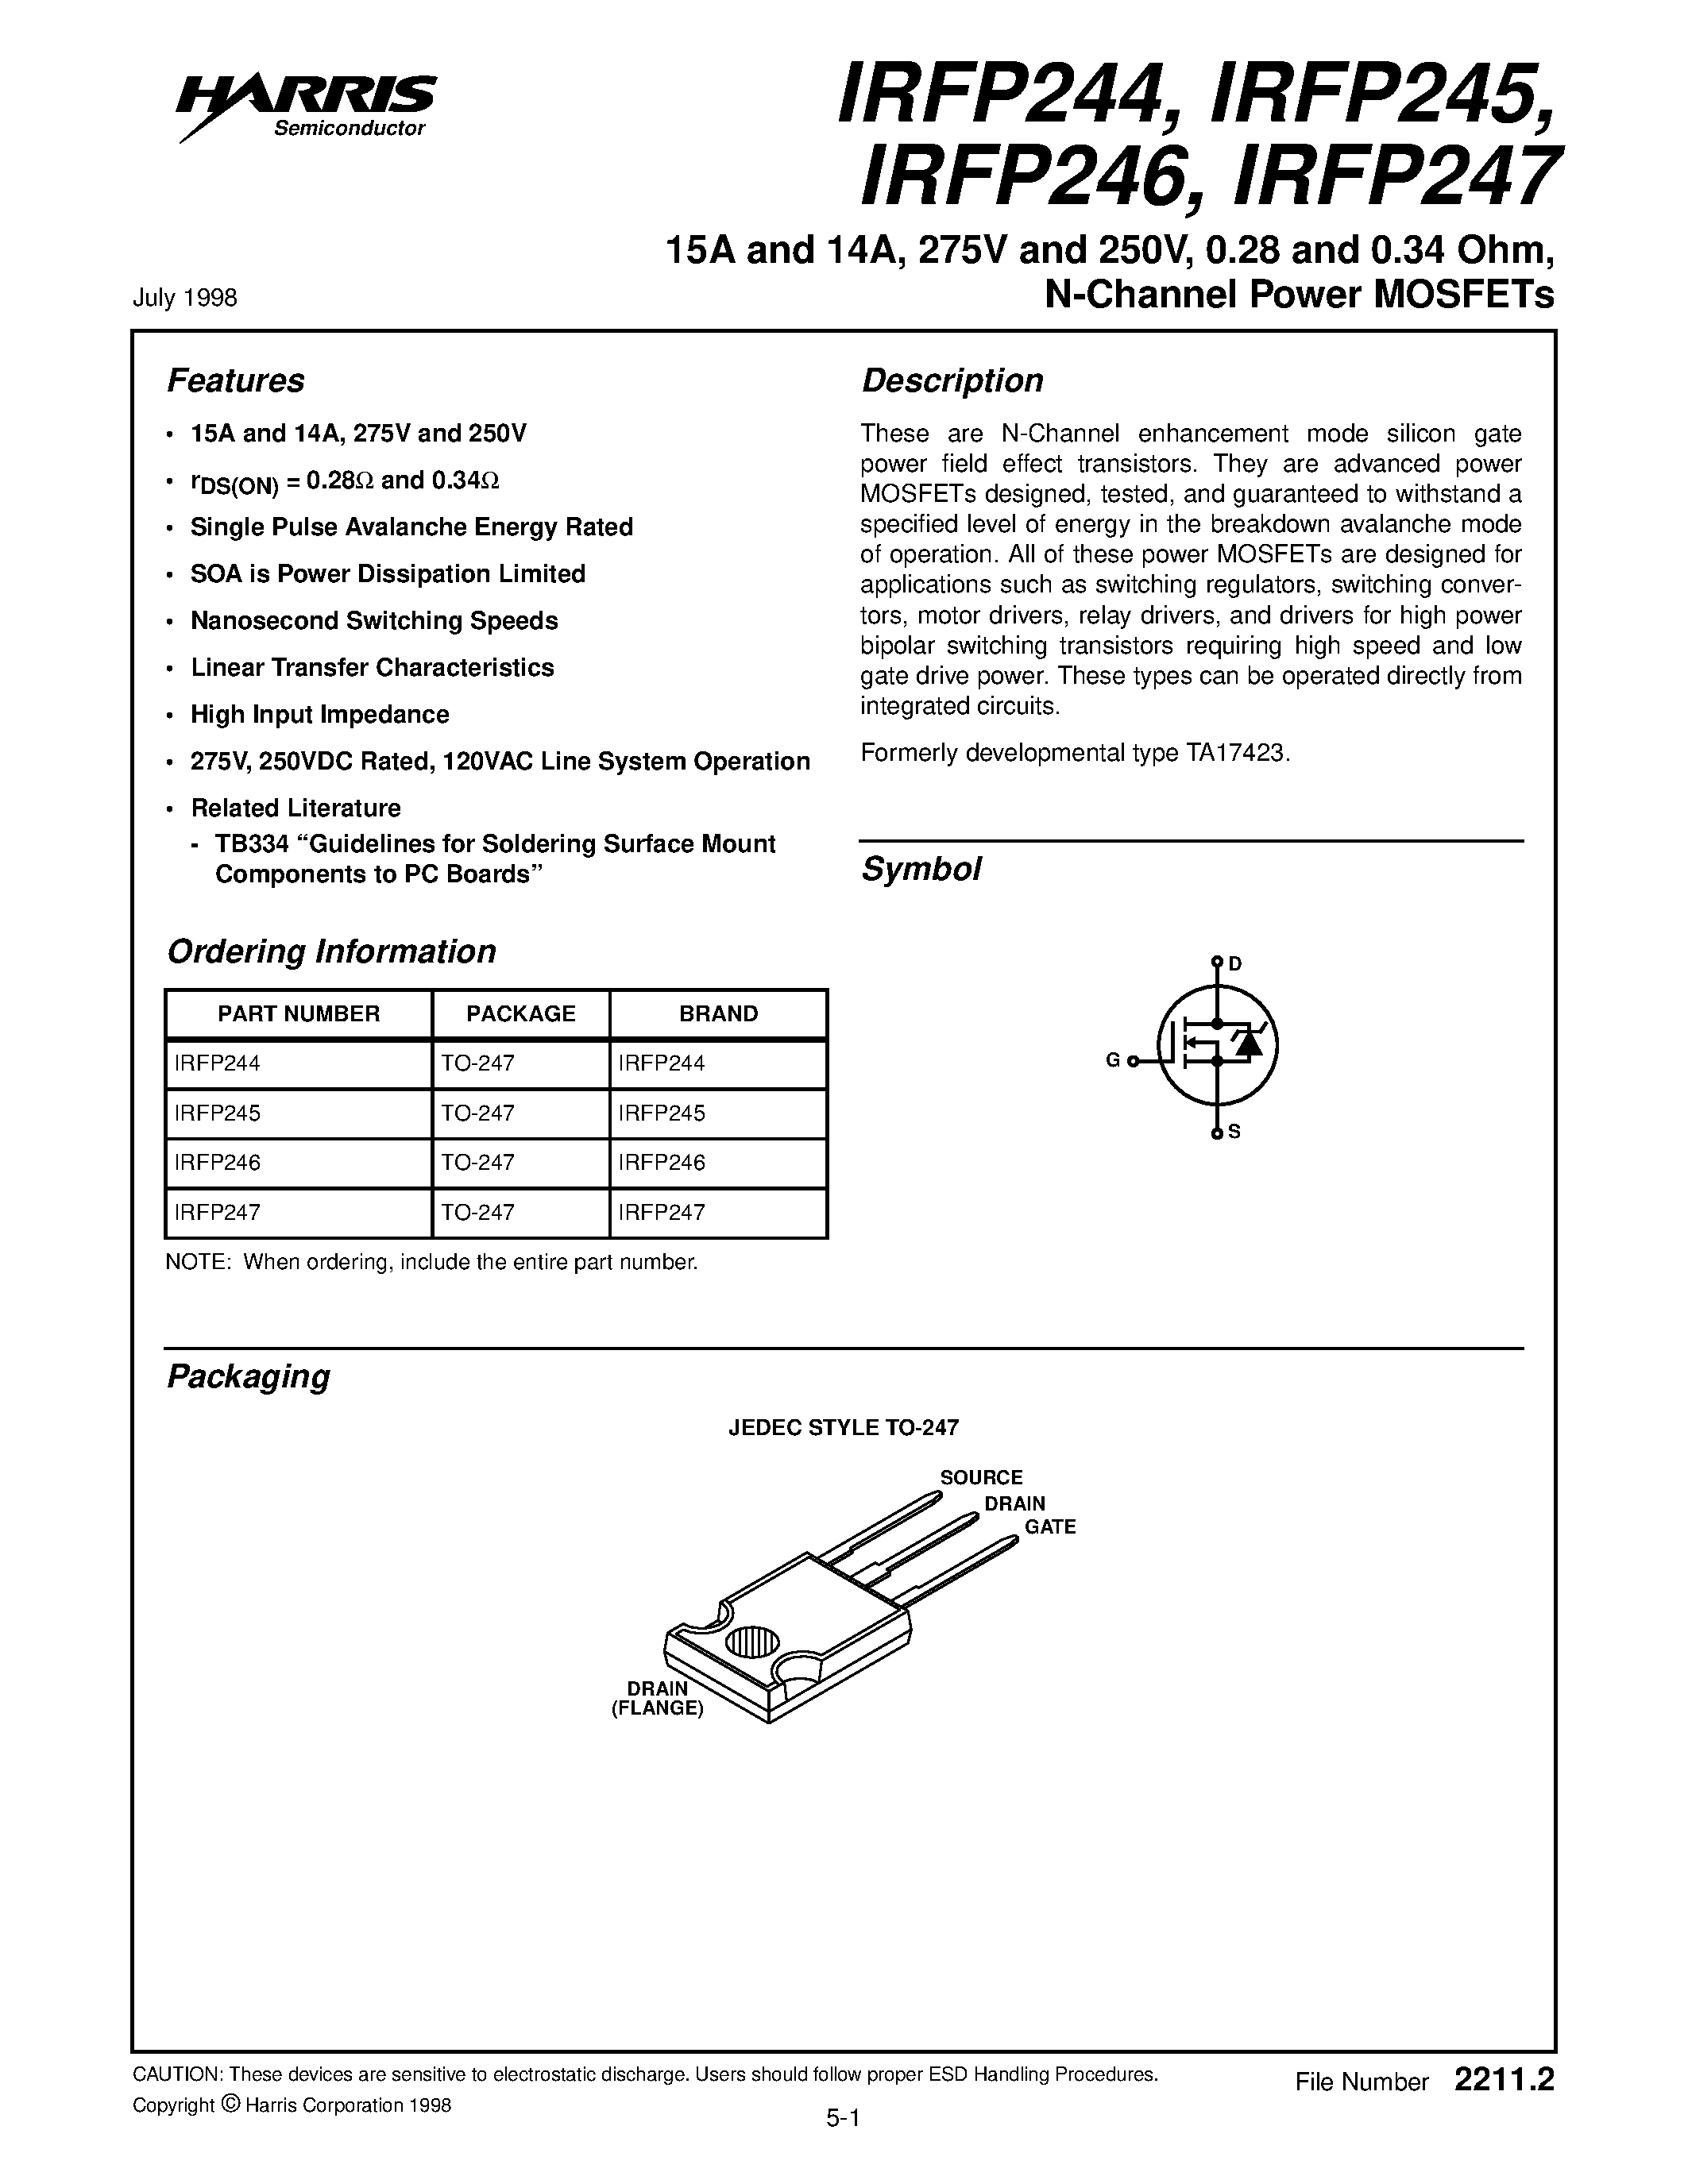 Datasheet IRFP244 - (IRFP244 / IRFP245 / IRFP246 / IRFP247) N-Channel Power MOSFETs page 1